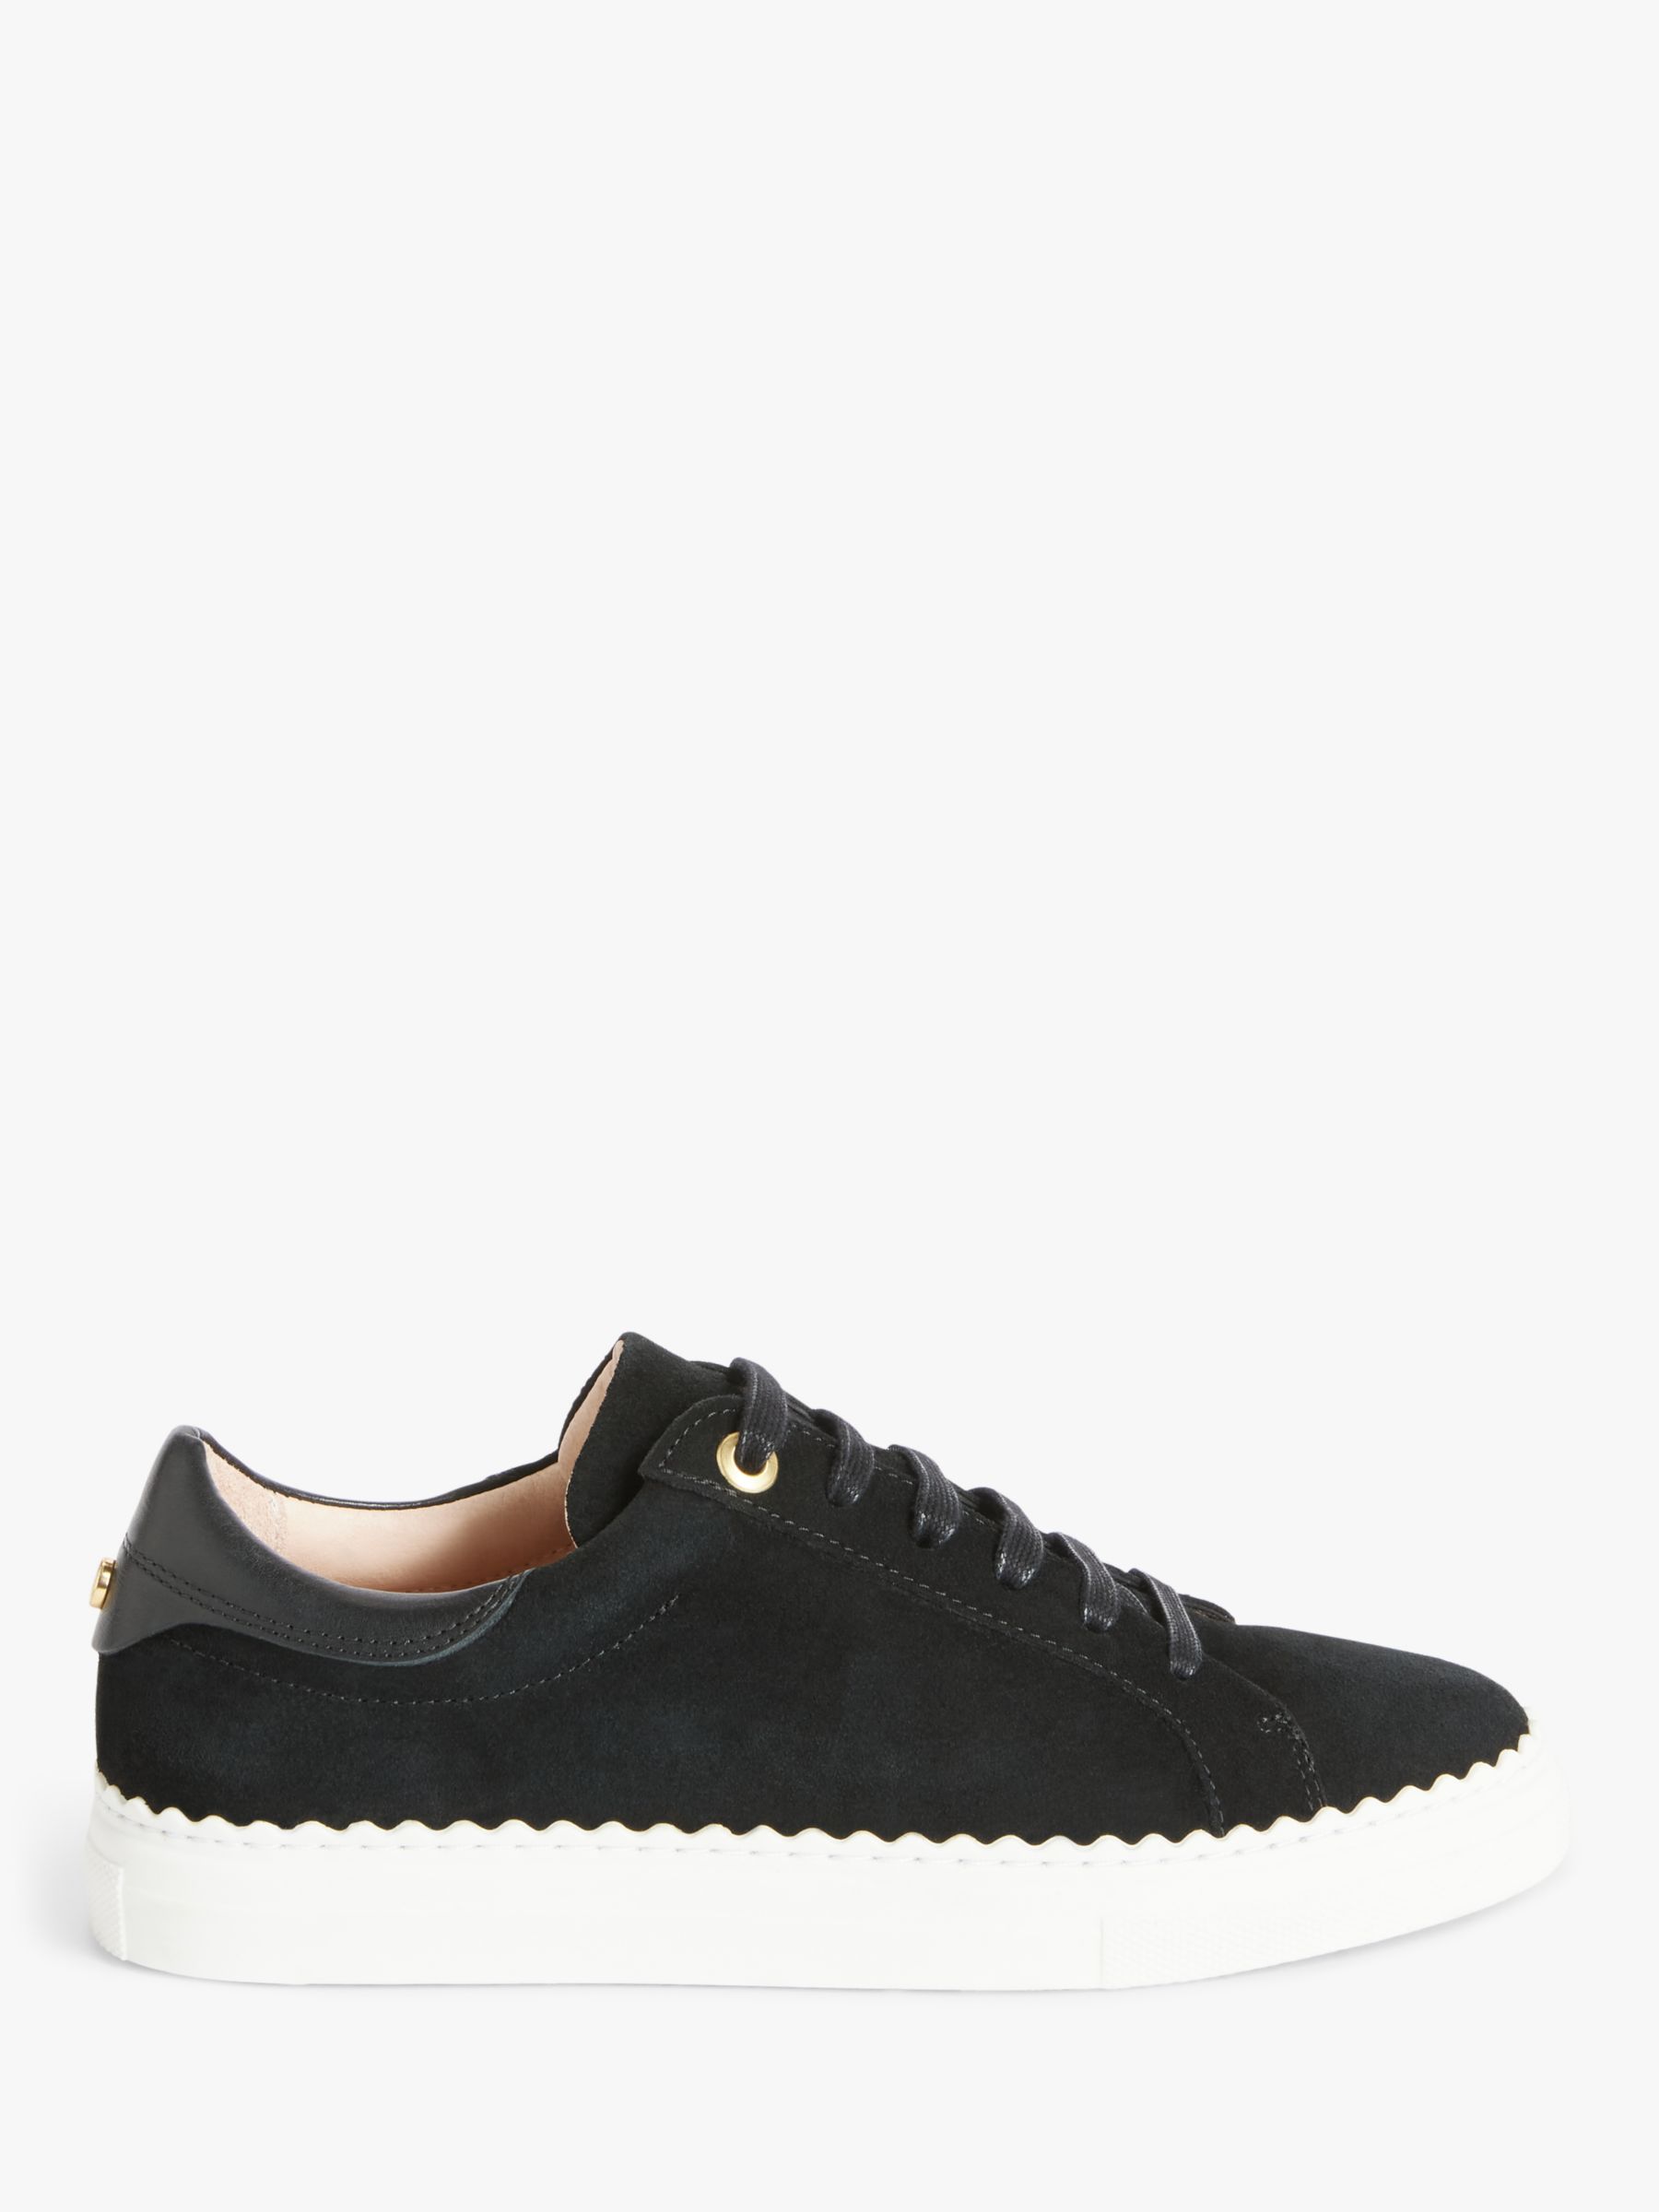 John Lewis Fiona Scalloped Detail Suede Trainers, Black, 3